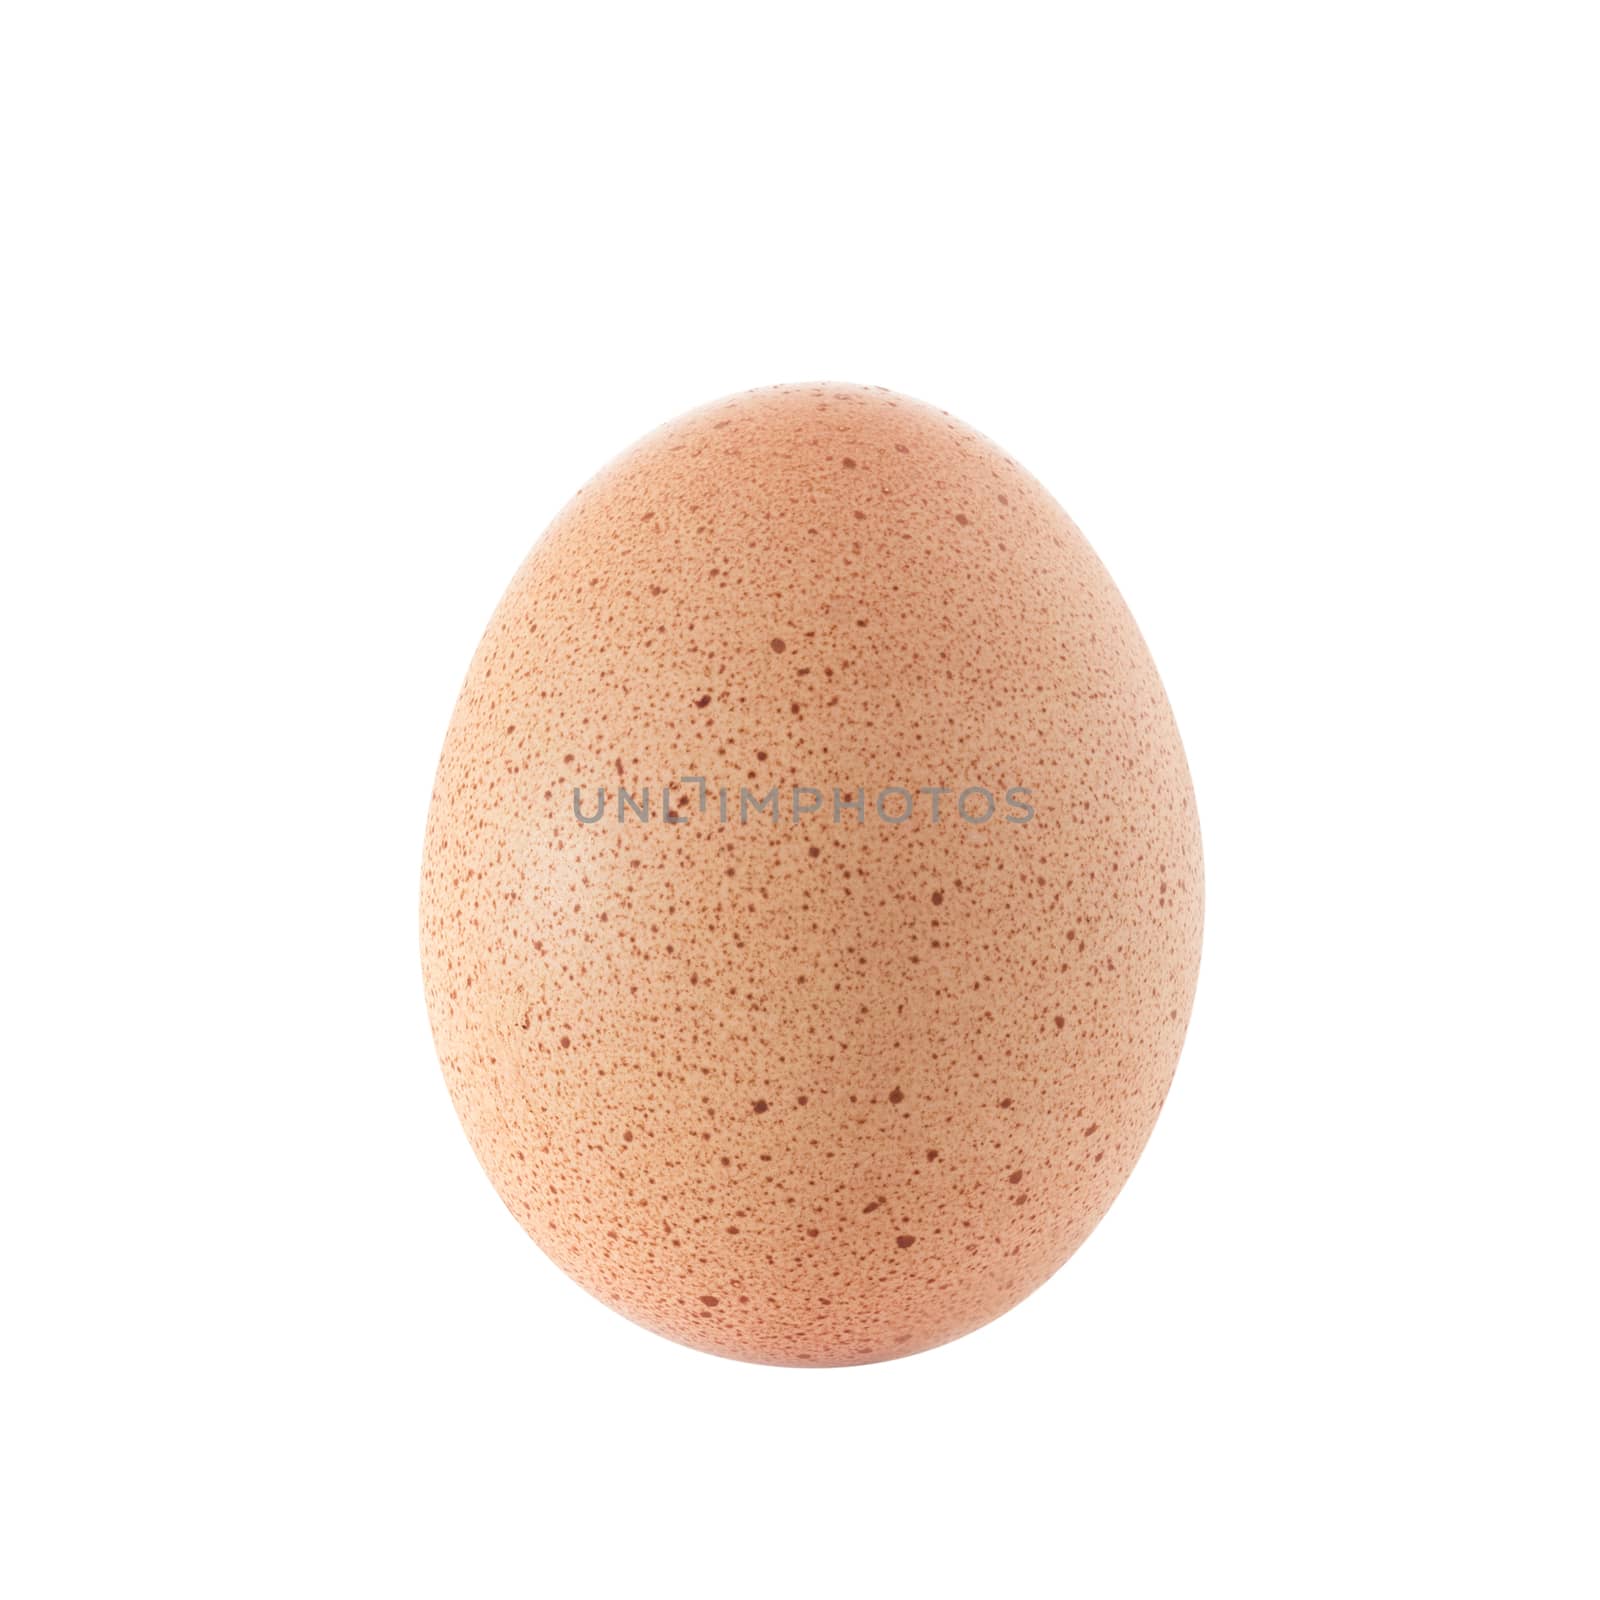 Egg with stains isolated on white background